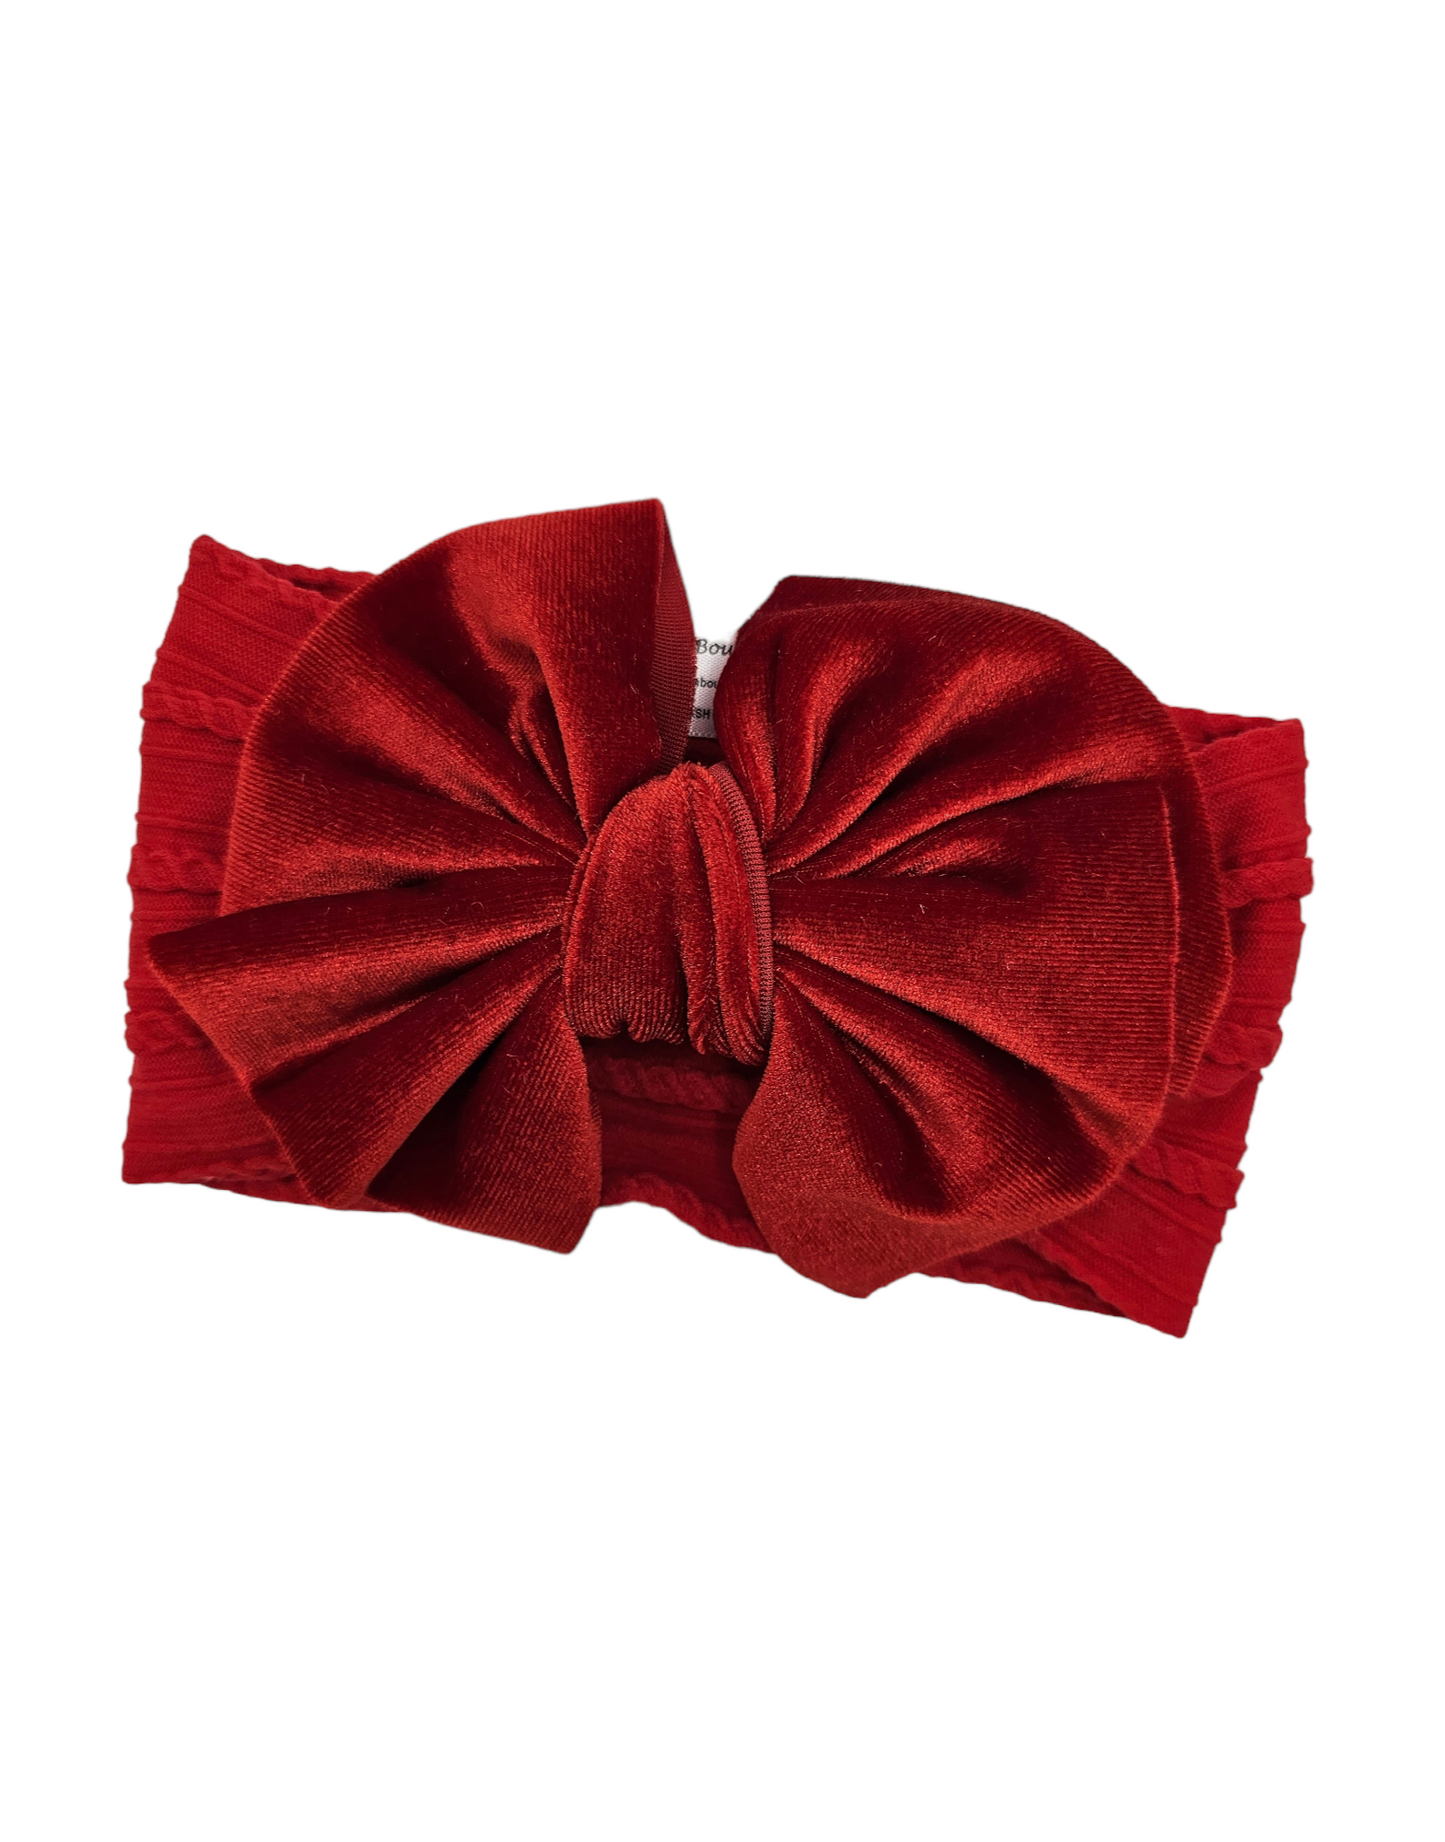 Red Velvet Larger Bow Cable Knit Headwrap - Valentines Collection - Betty Brown Boutique Ltd